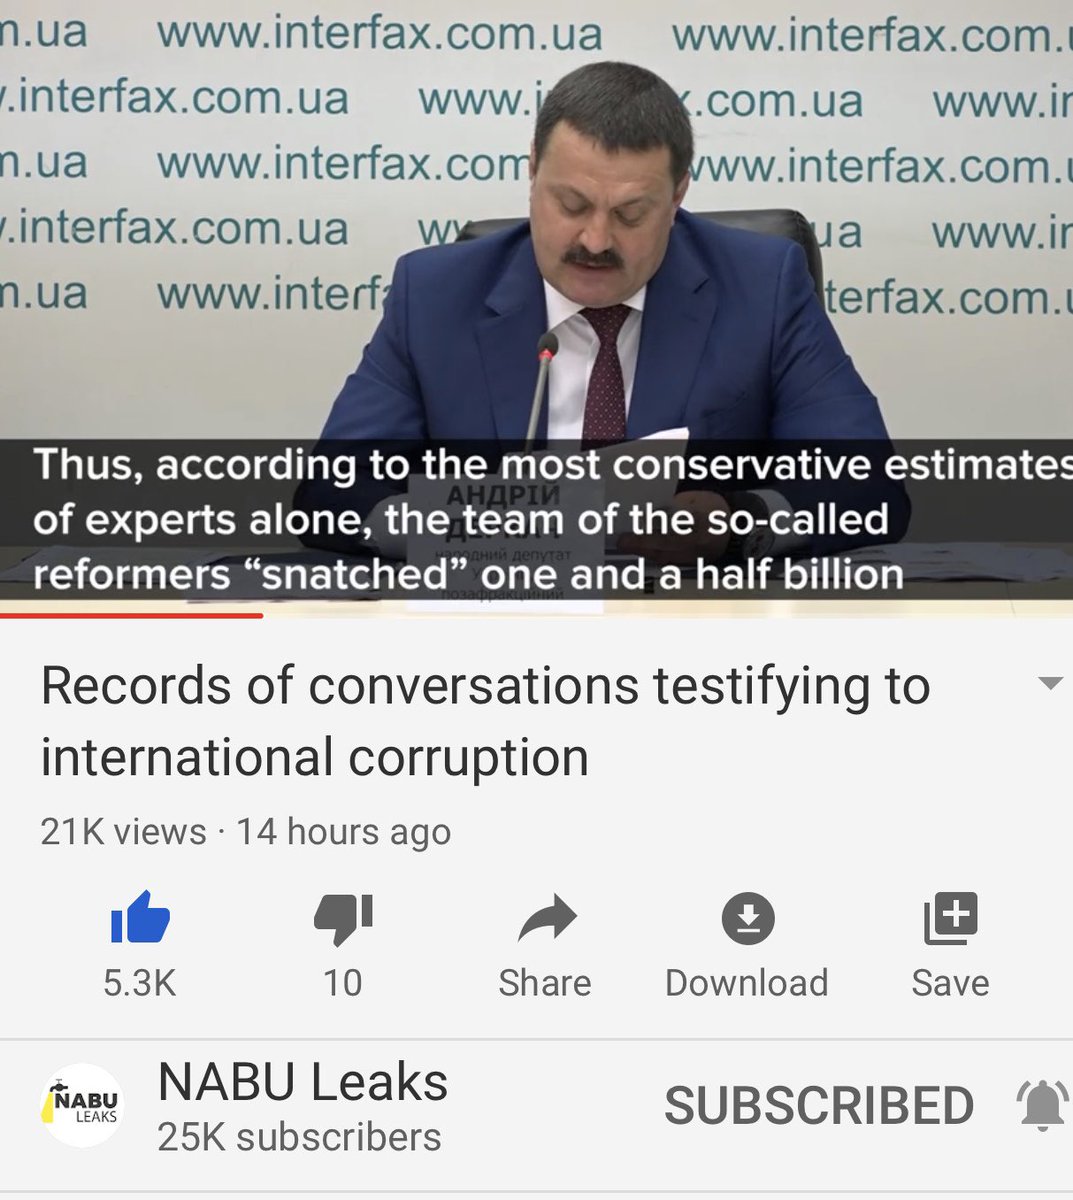 He further discusses the corruption tax as he calls jr, which has stolen half a billion from the citizens of Ukraine and the talks about the irony of Ukraine energy independence; it’s not obviously.